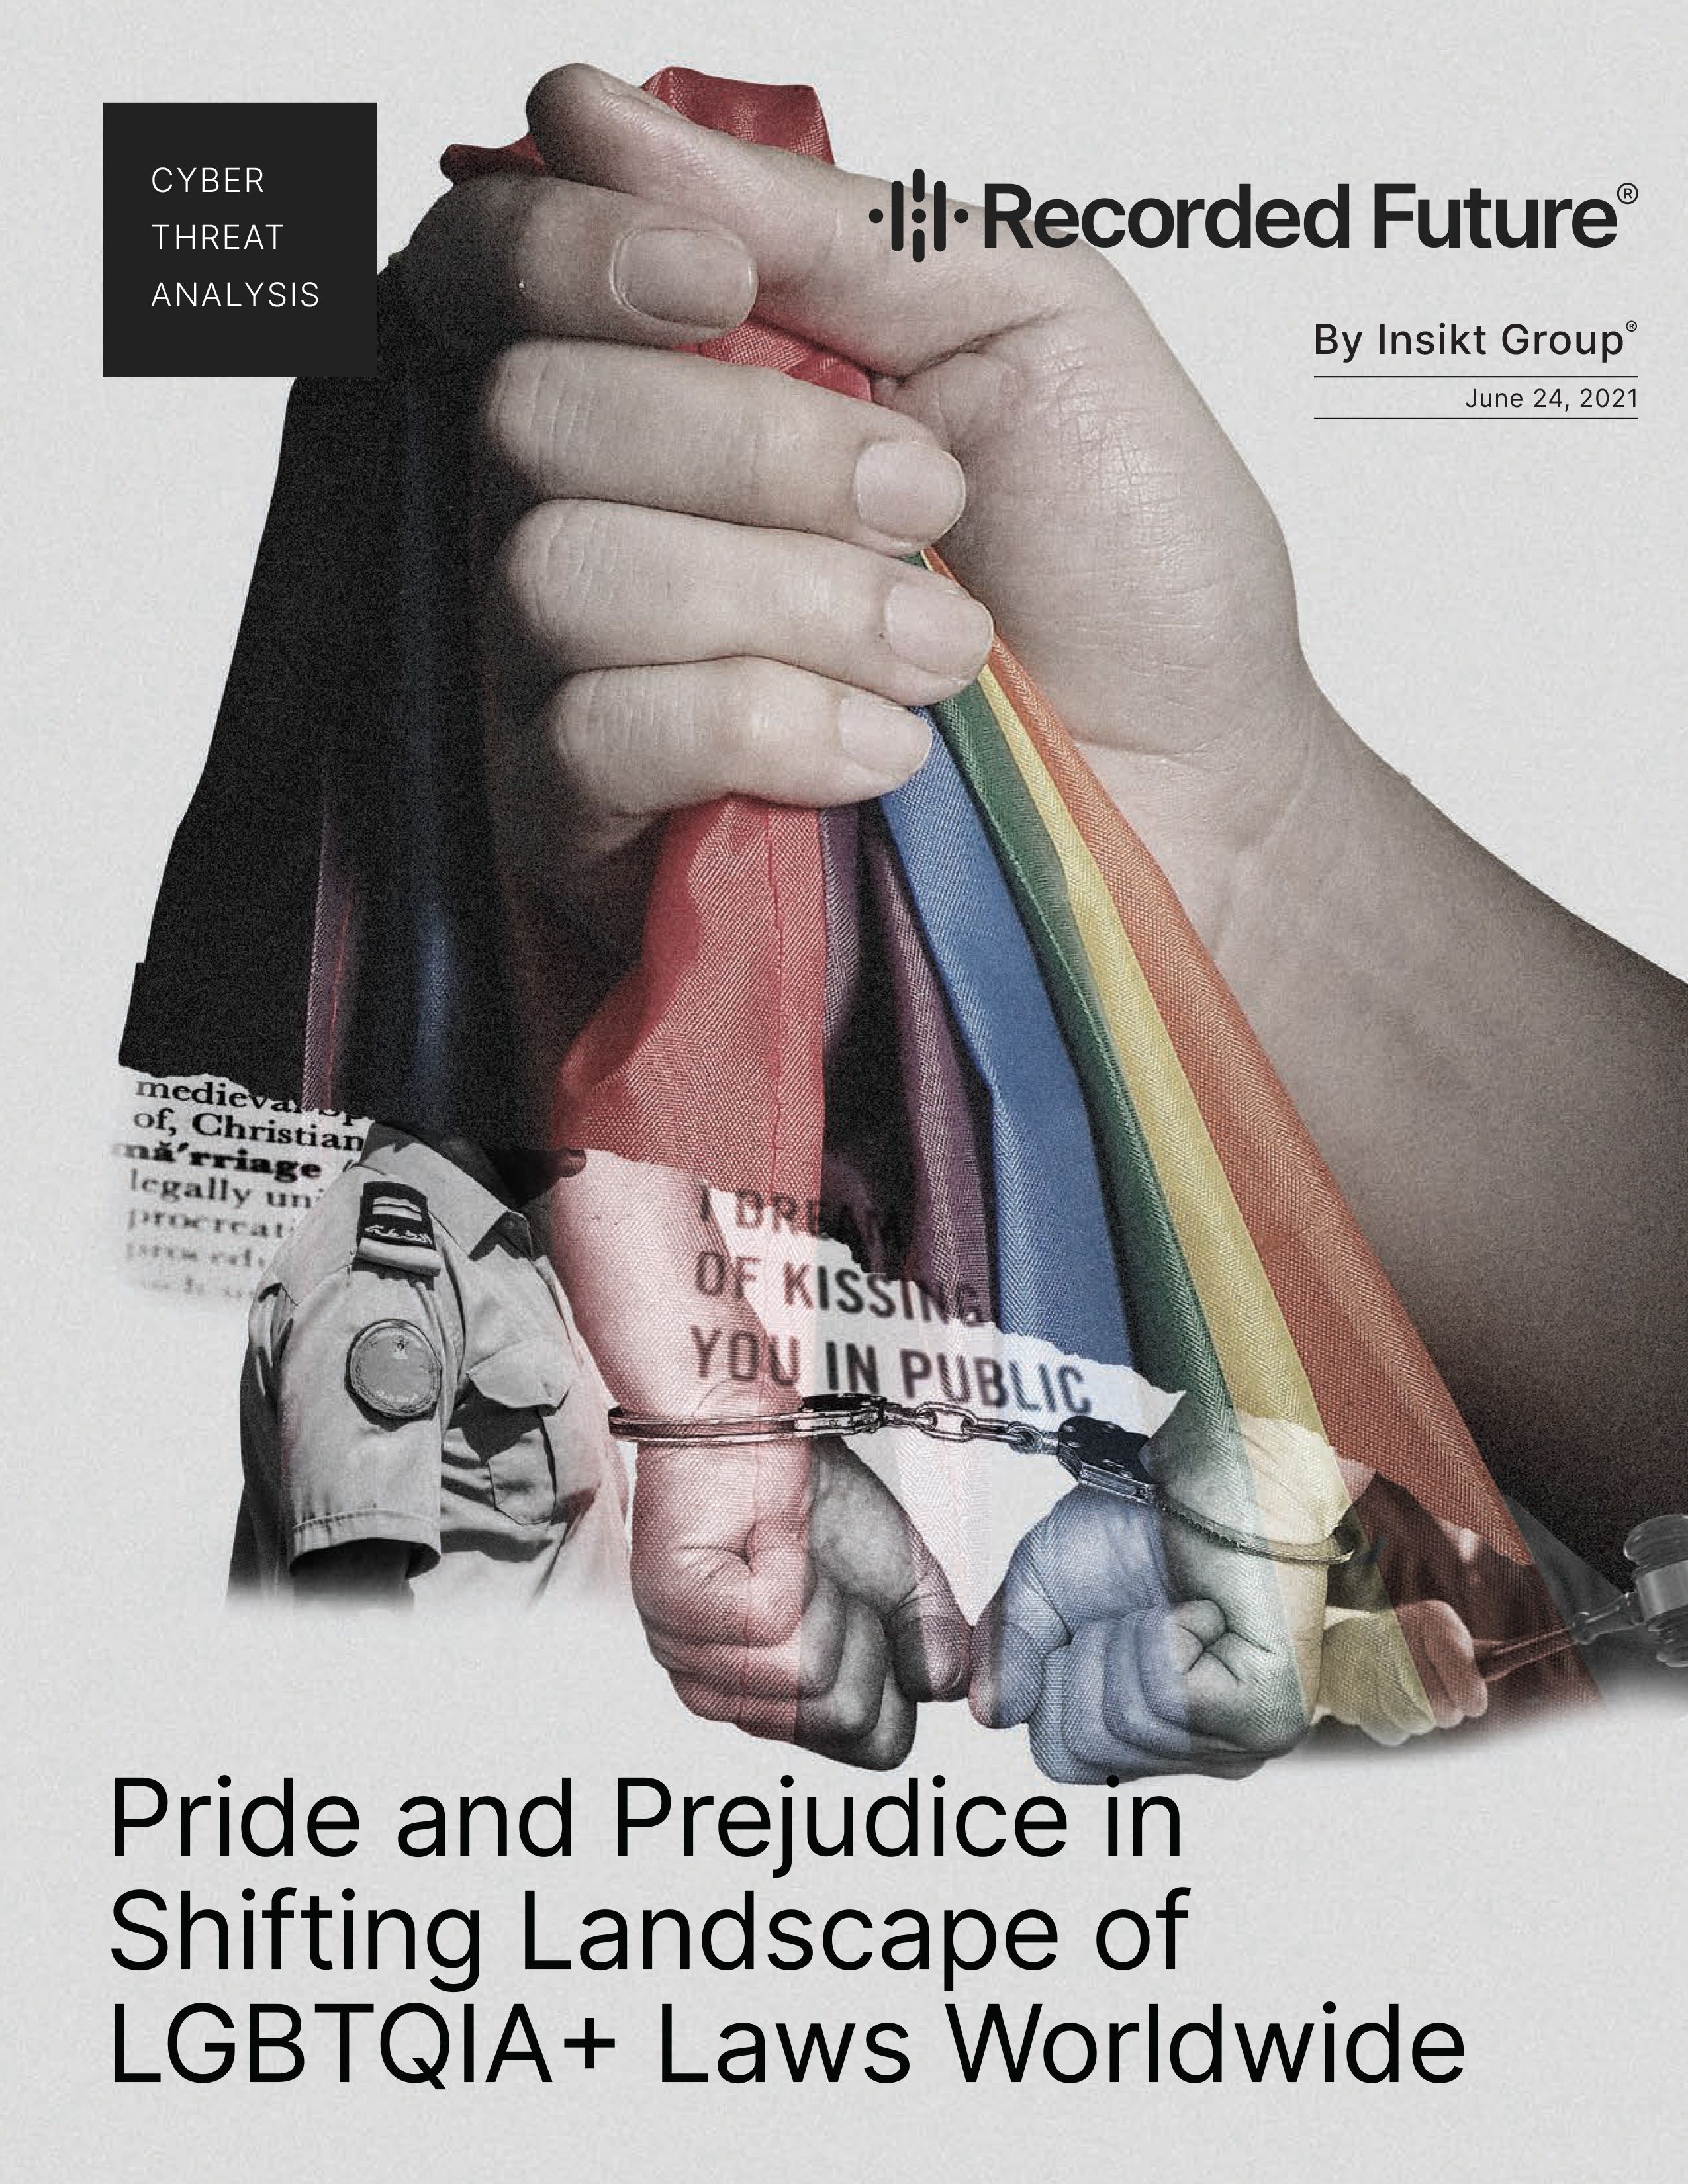 Pride and Prejudice in Shifting Landscape of LGBTQIA+ Laws Worldwide